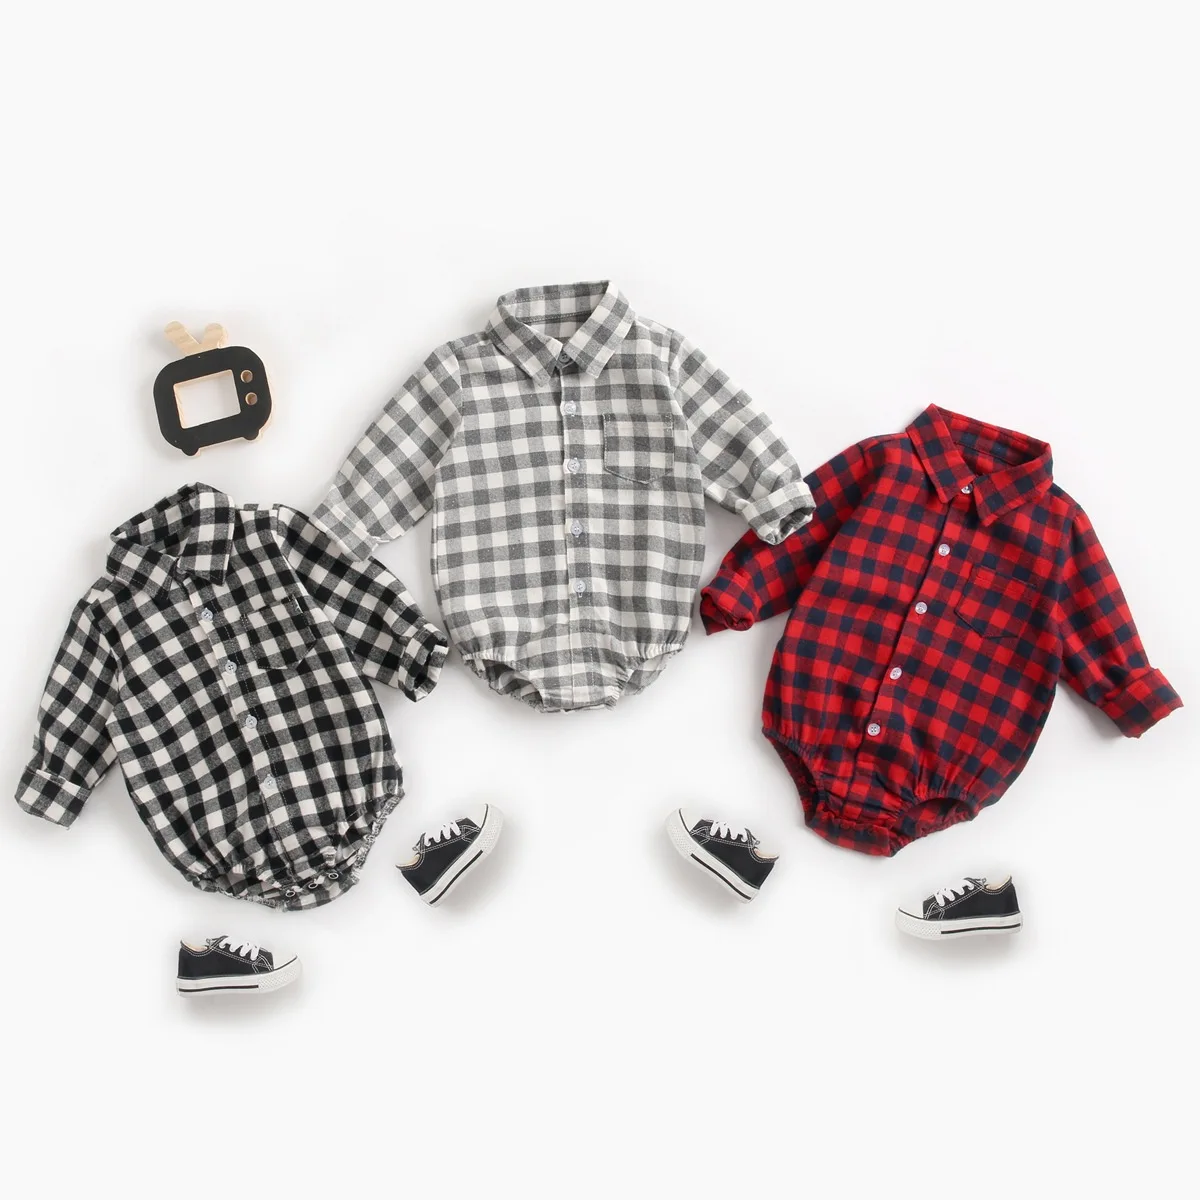 

2020 Autumn winter check boy shirt long sleeve plaid crawl clothes baby romper cute kids clothing for hot selling, As pic shows, we can according to your request also